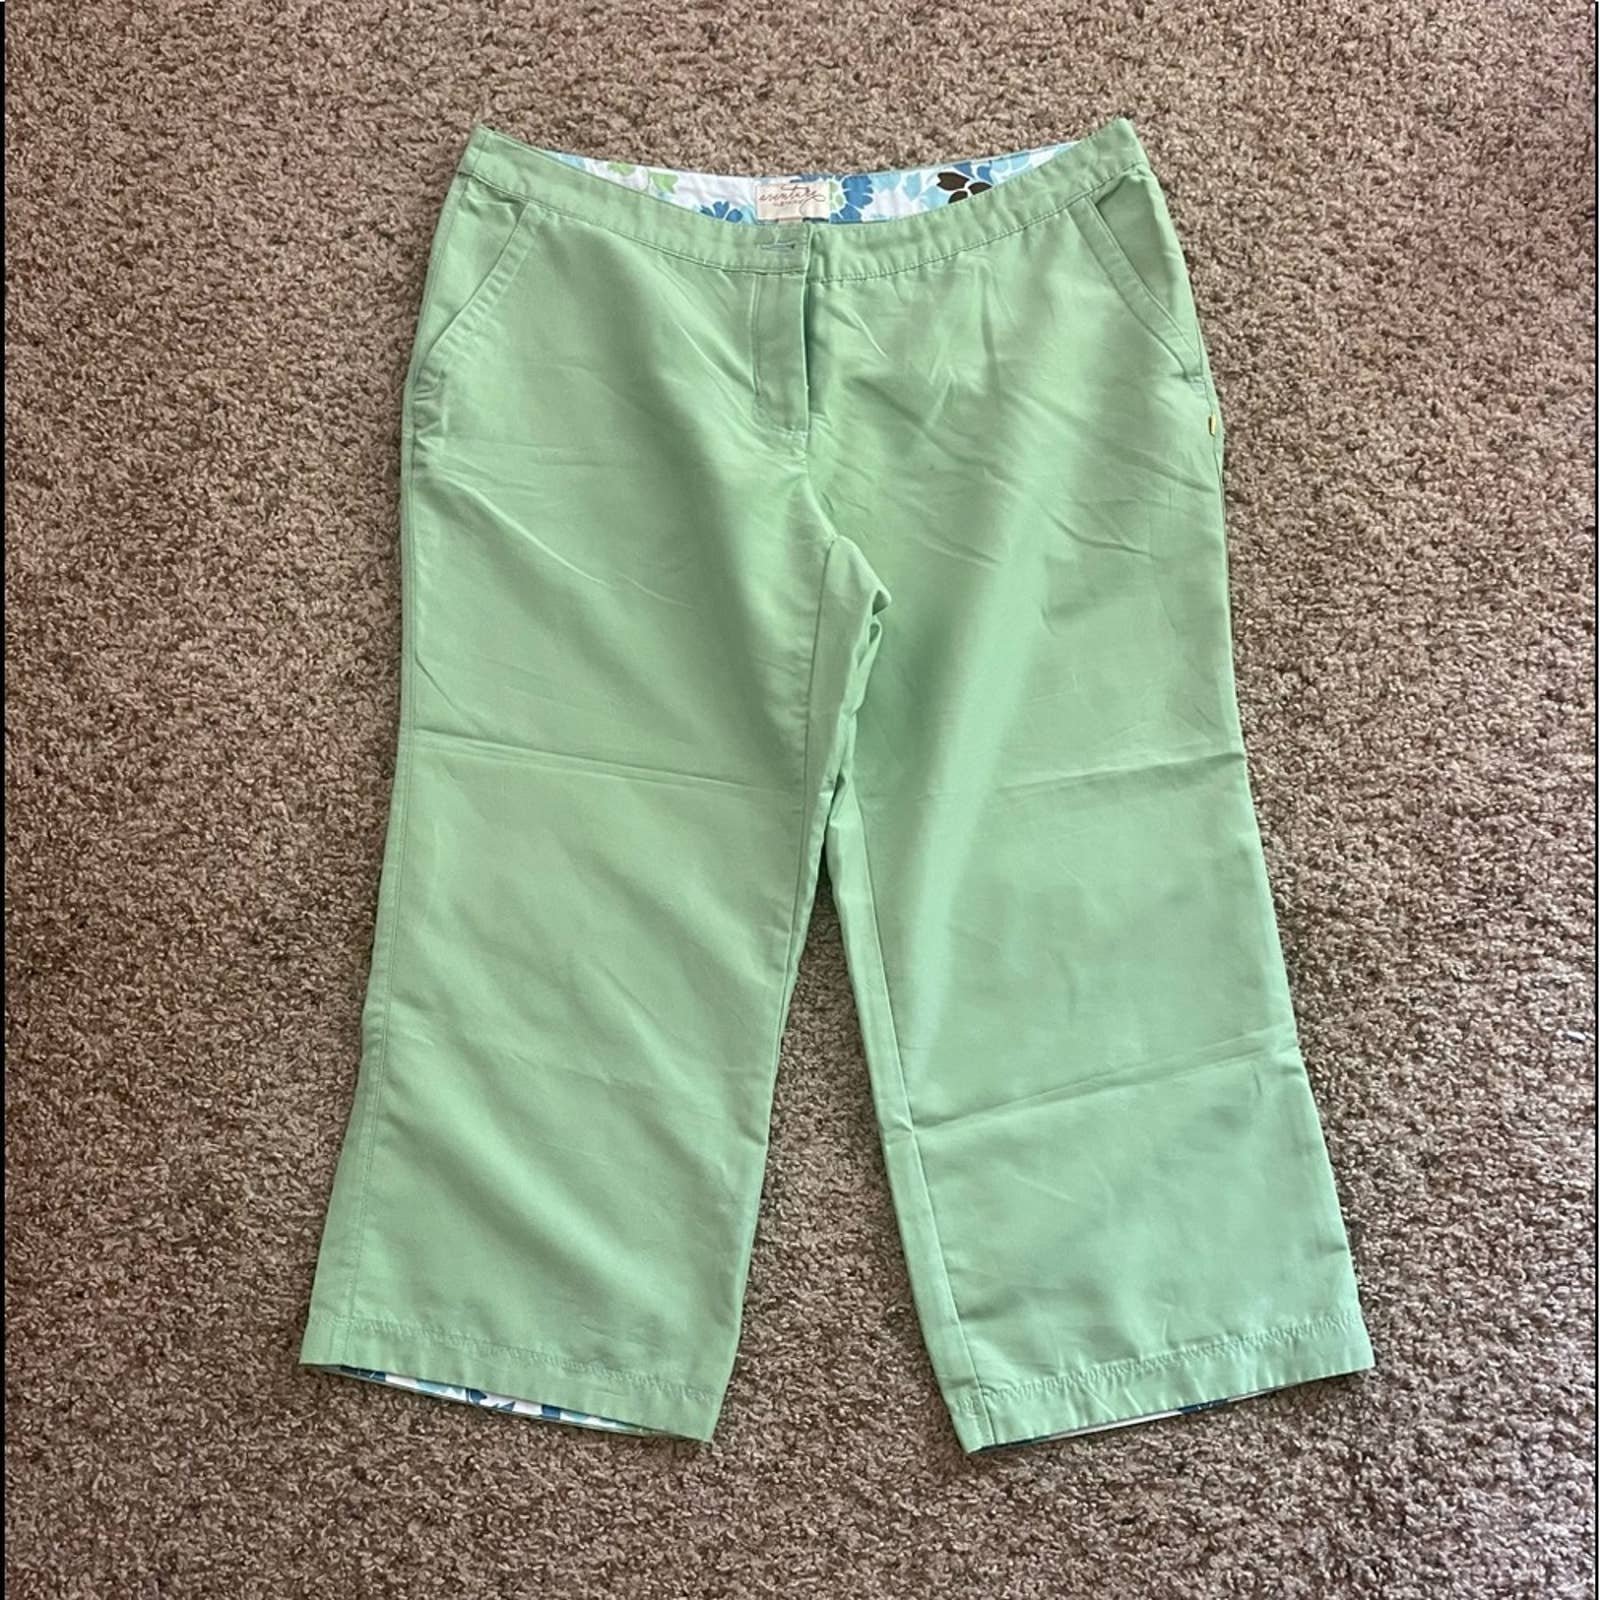 High quality Sea Green Capris OCT4gt11p Outlet Store